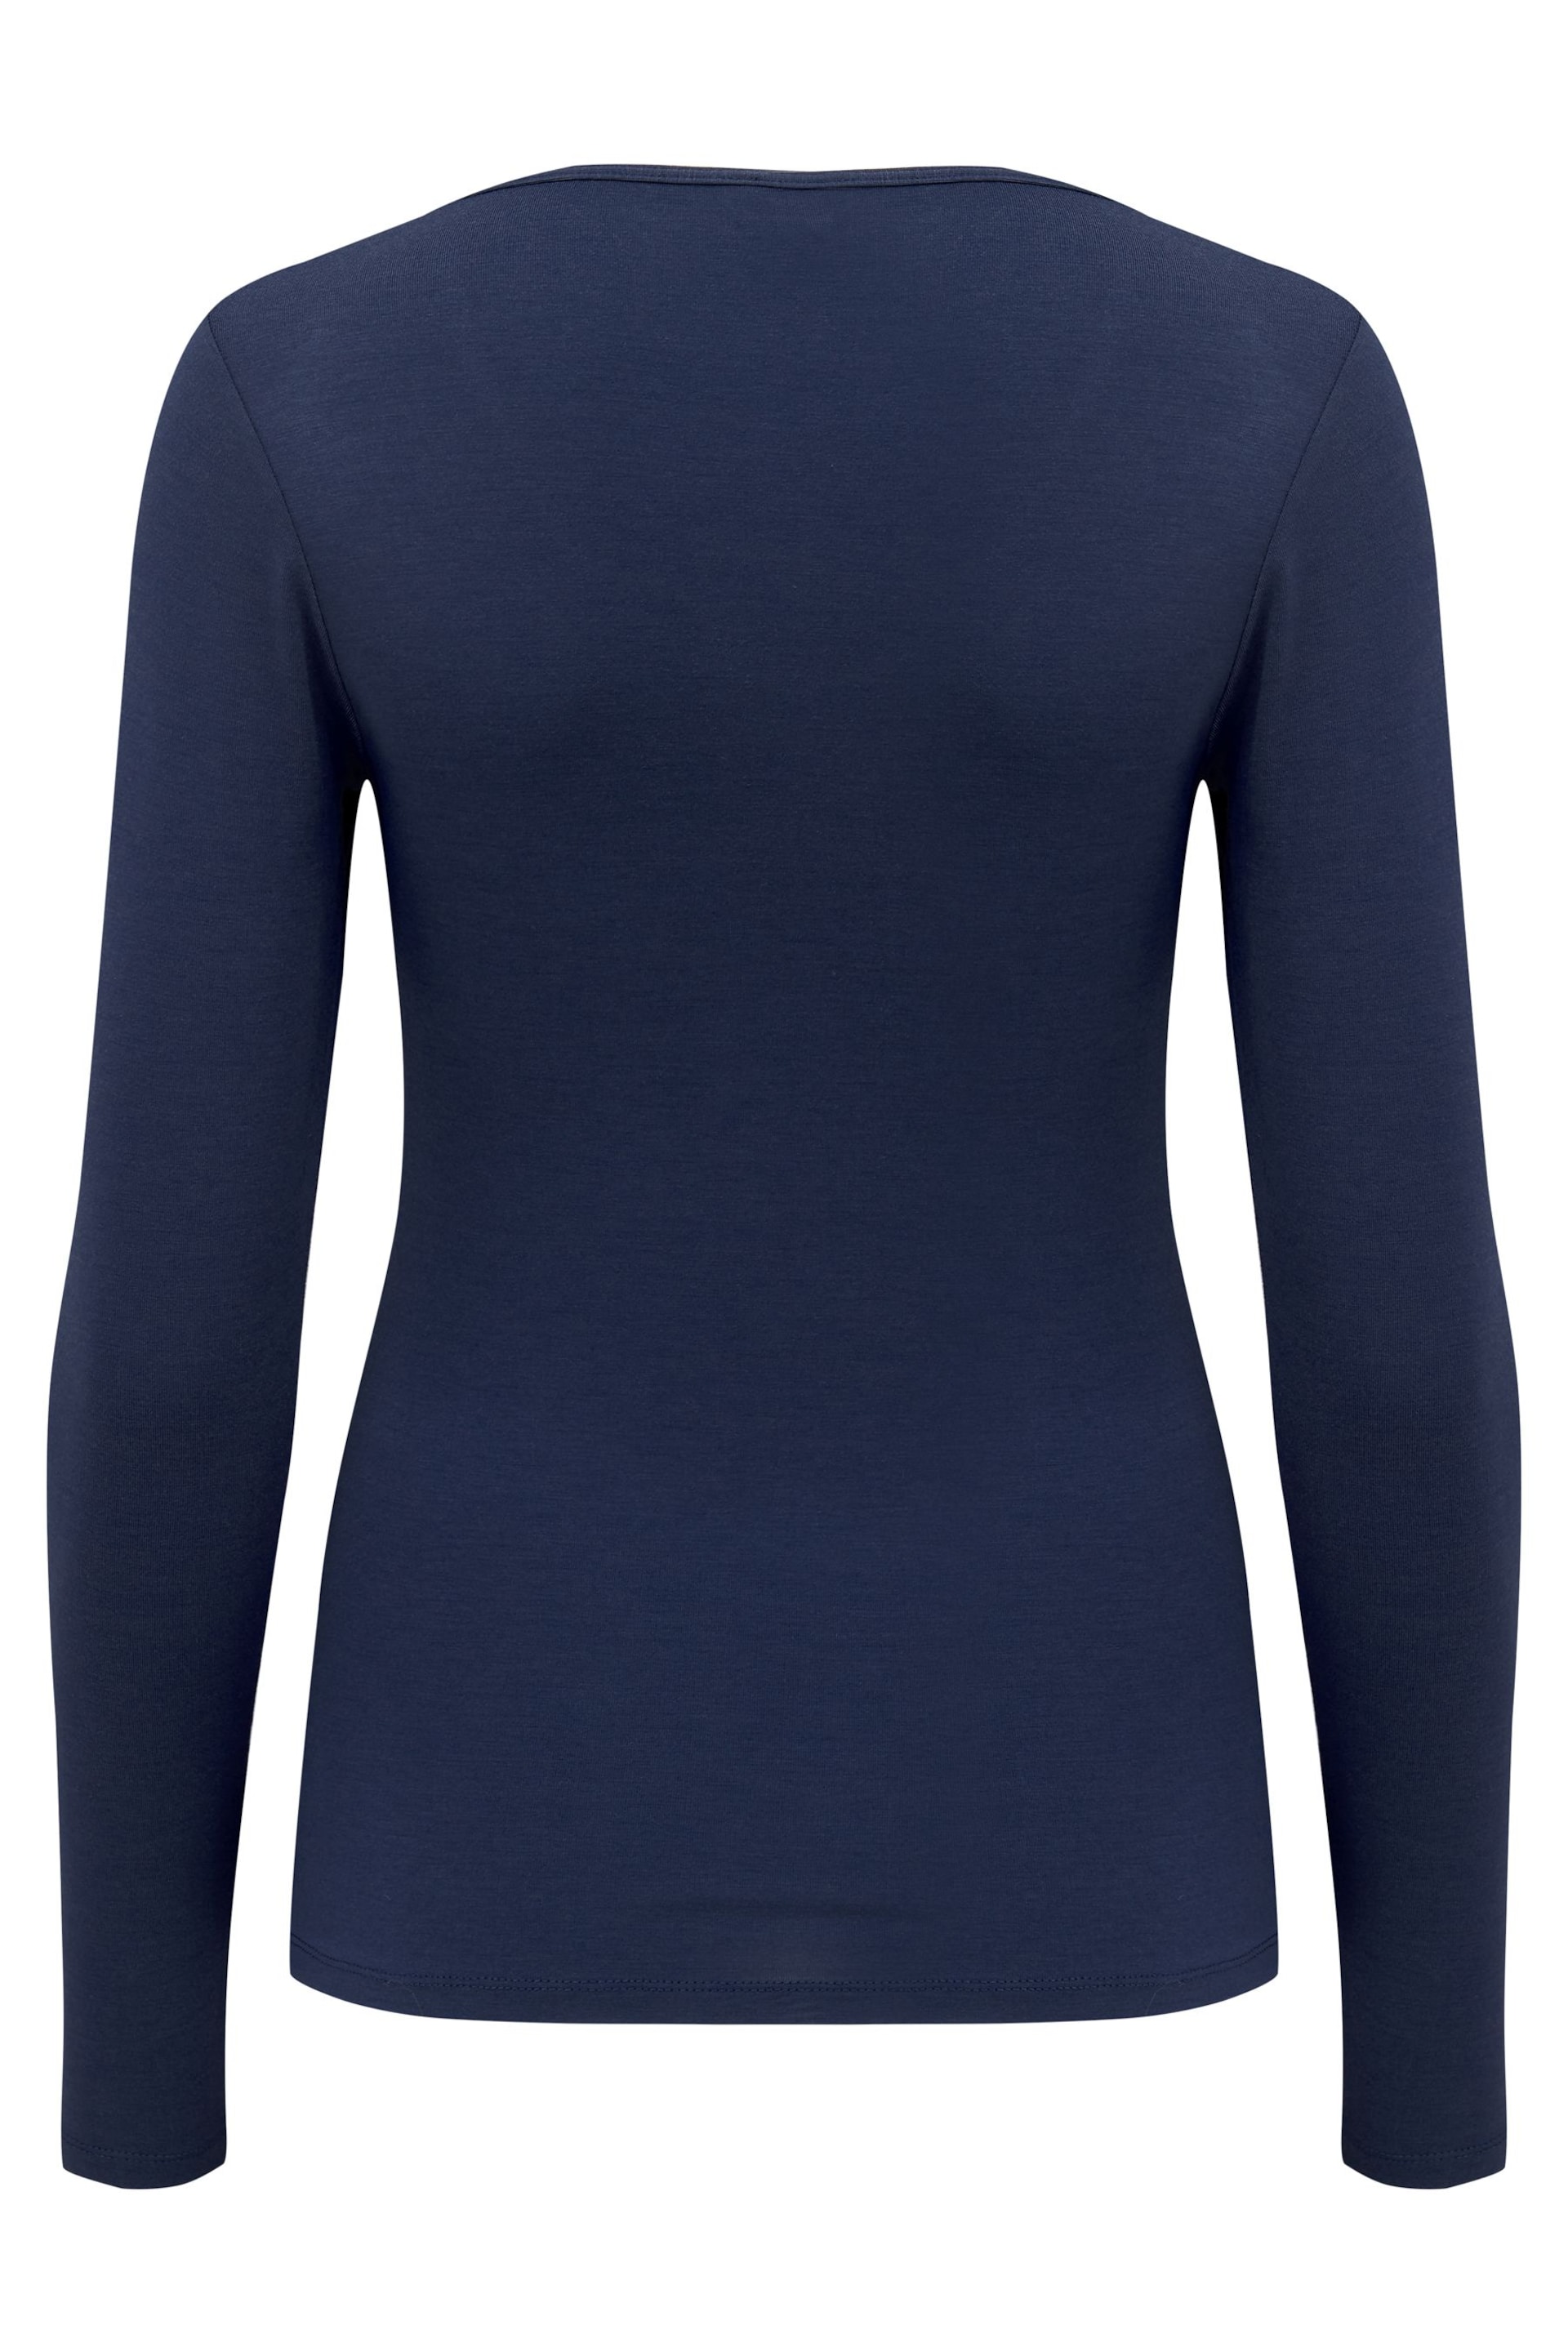 Pour Moi Blue Navy Blue Round Neck - Image 4 of 4